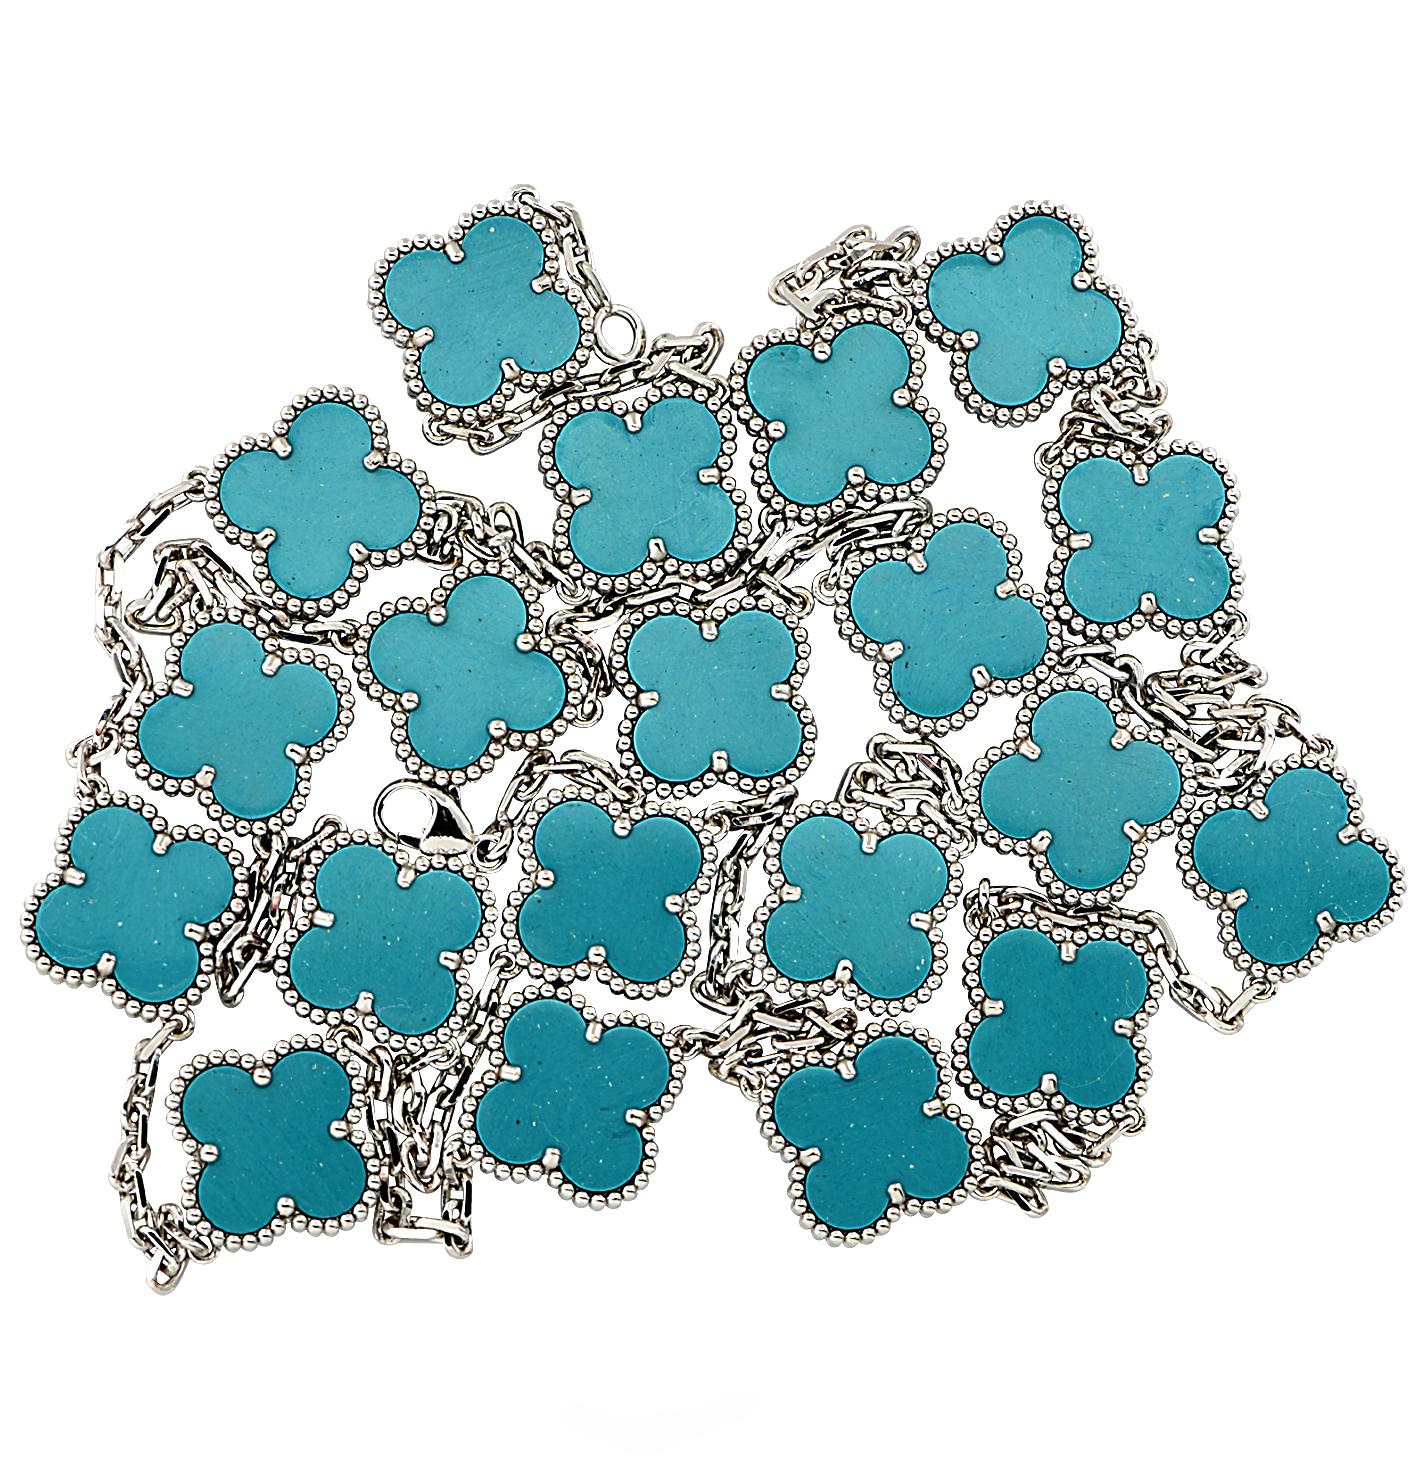 From the House of Van Cleef & Arpels, this exquisite Alhambra necklace, circa 2008, is finely handmade in 18 Karat white gold. Twenty motifs inspired by the clover and embellished with turquoise, are interspersed on a white gold chain measuring 33